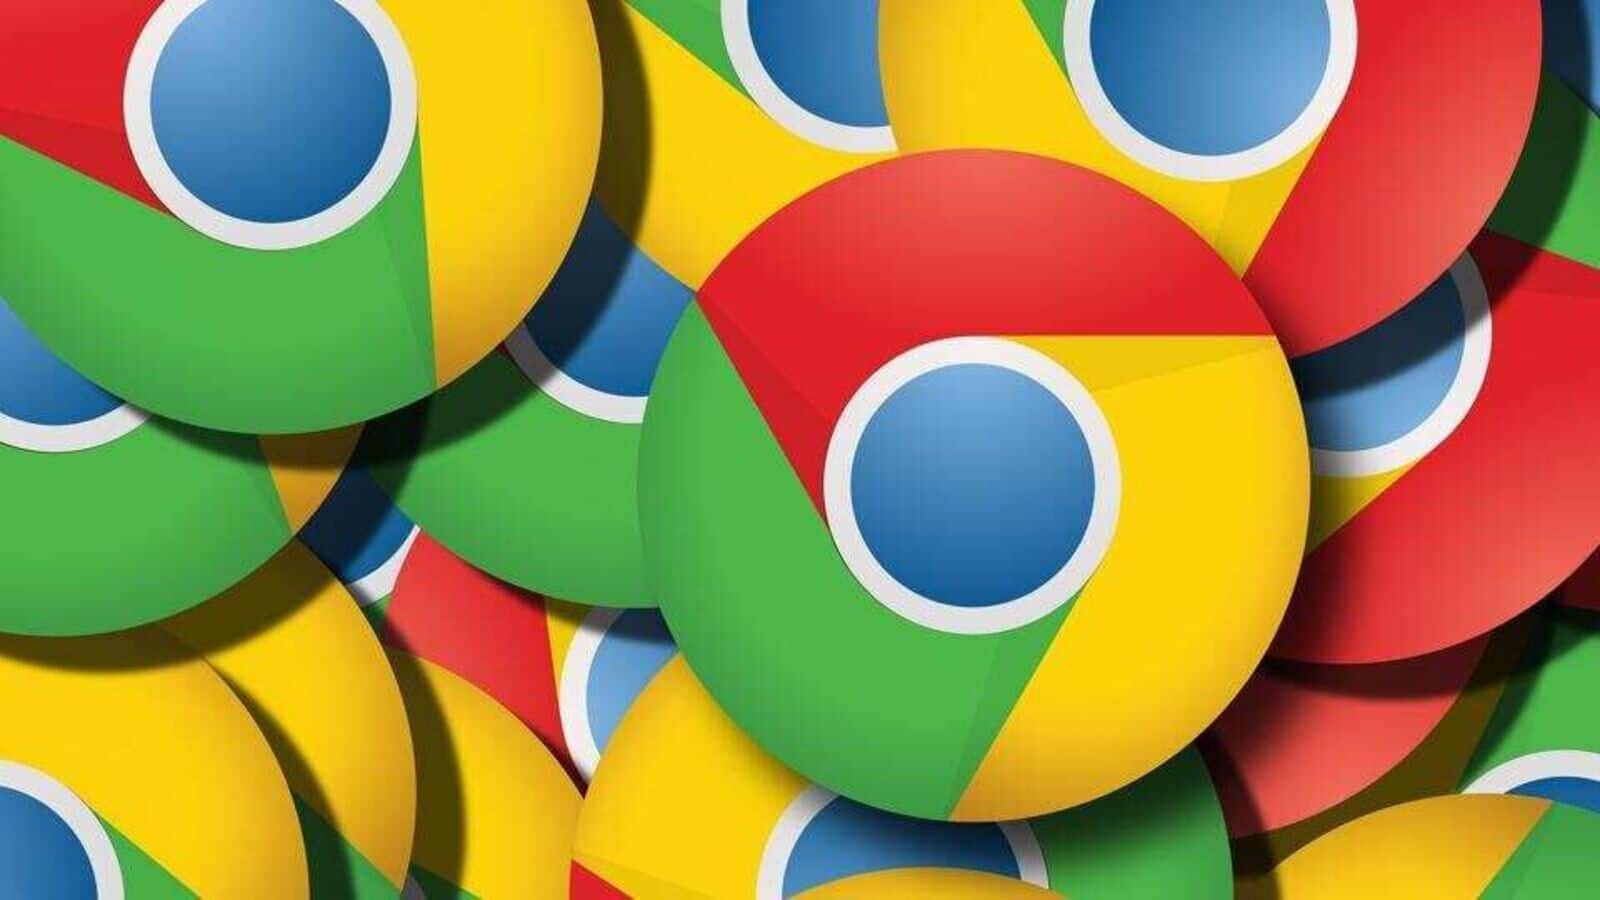 CERT-In issues high-risk vulnerability warning to Google Chrome users